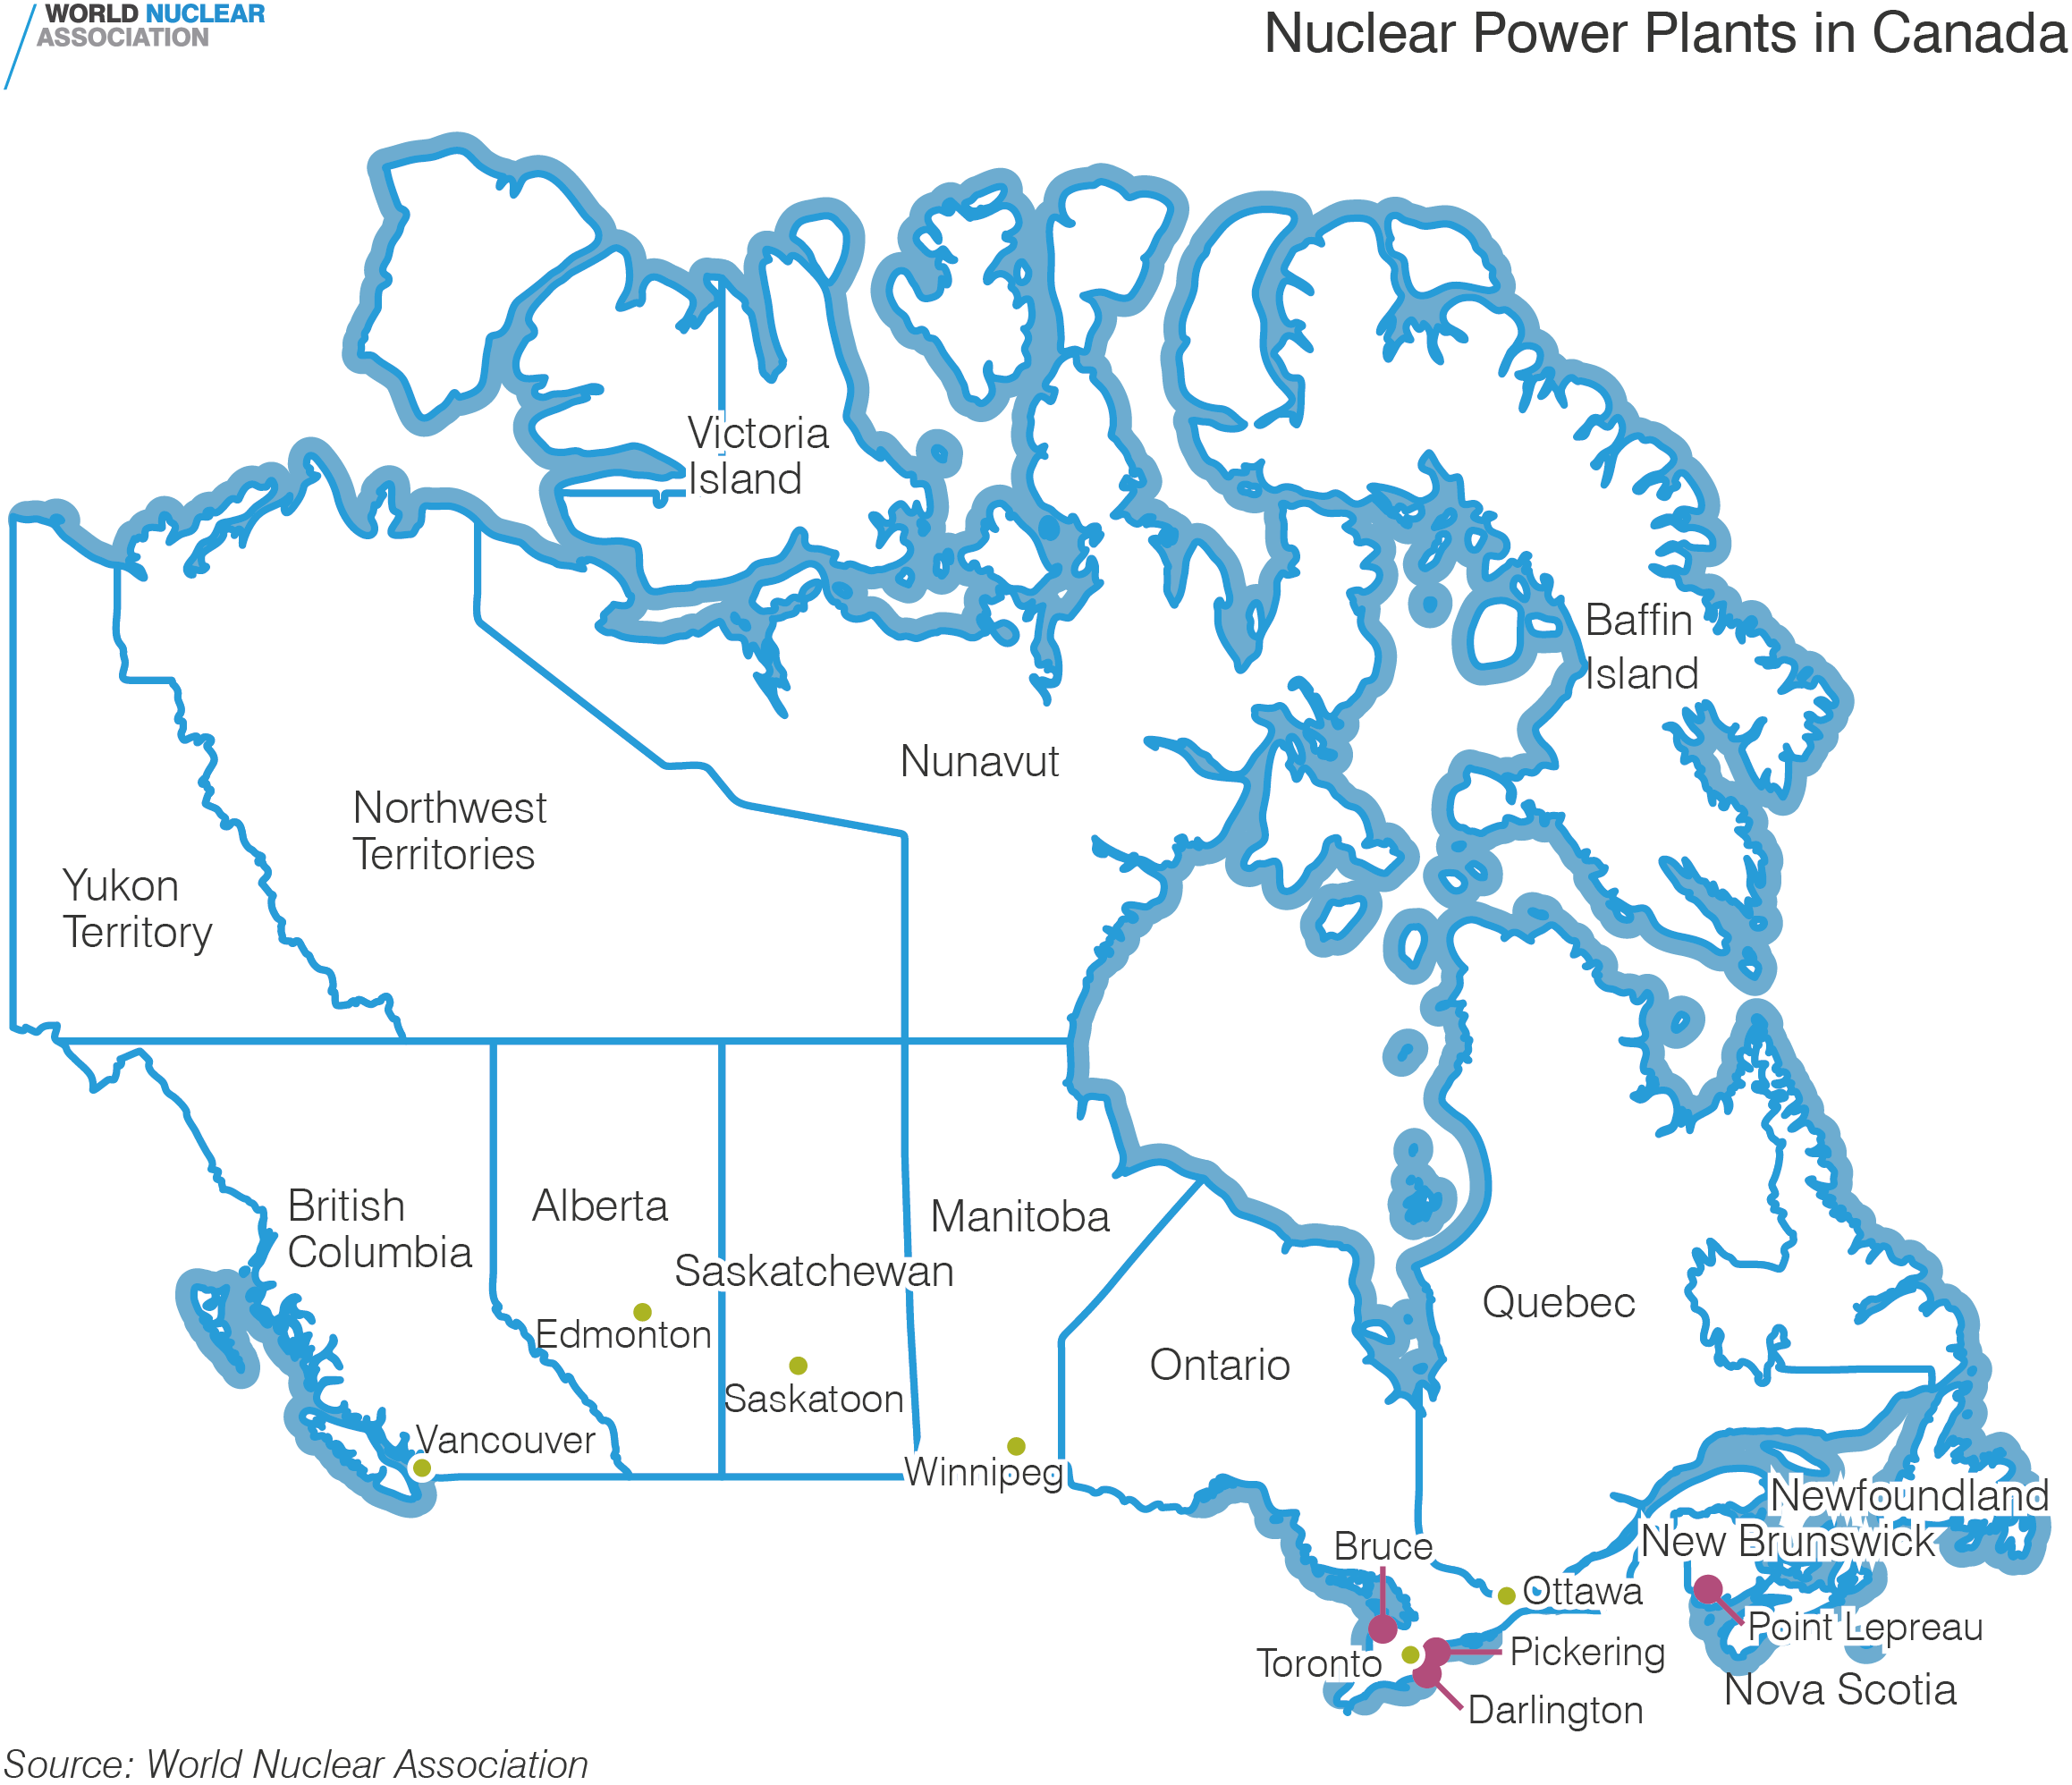 Nuclear Power Plants in Canada